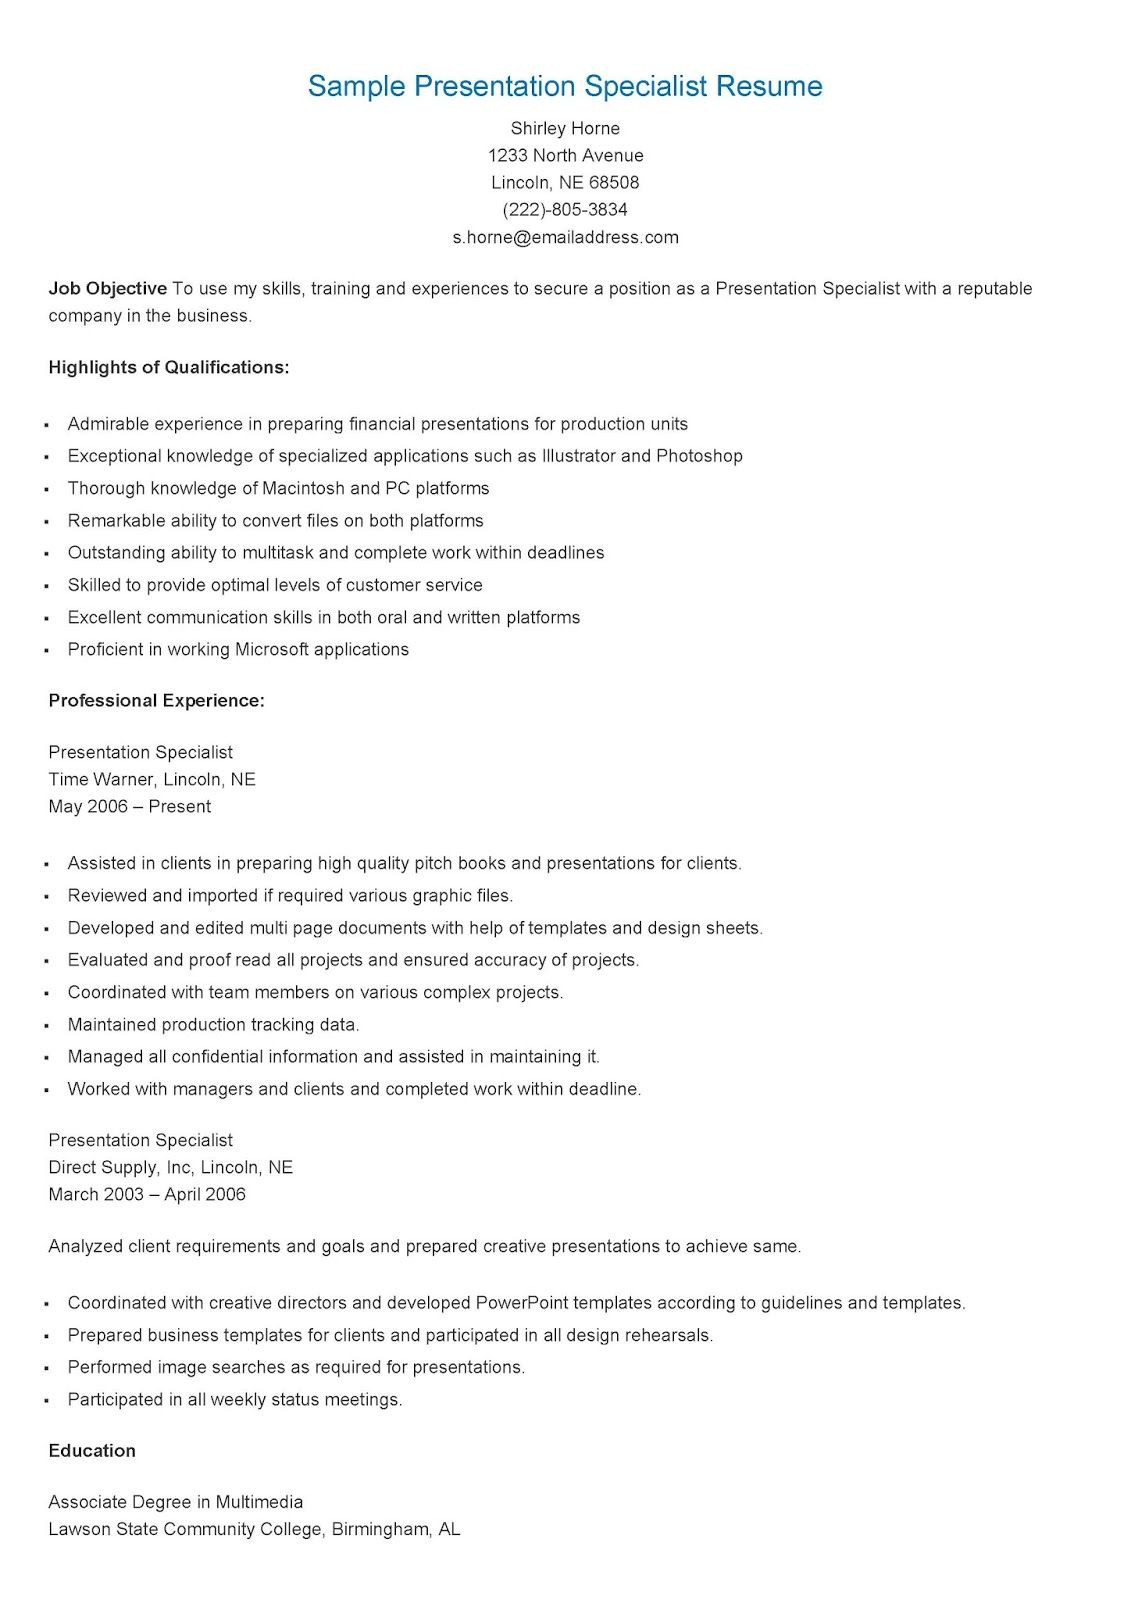 Lawson Sample Resume with Project Overview Sample Presentation Specialist Resume Resume, Presentation …